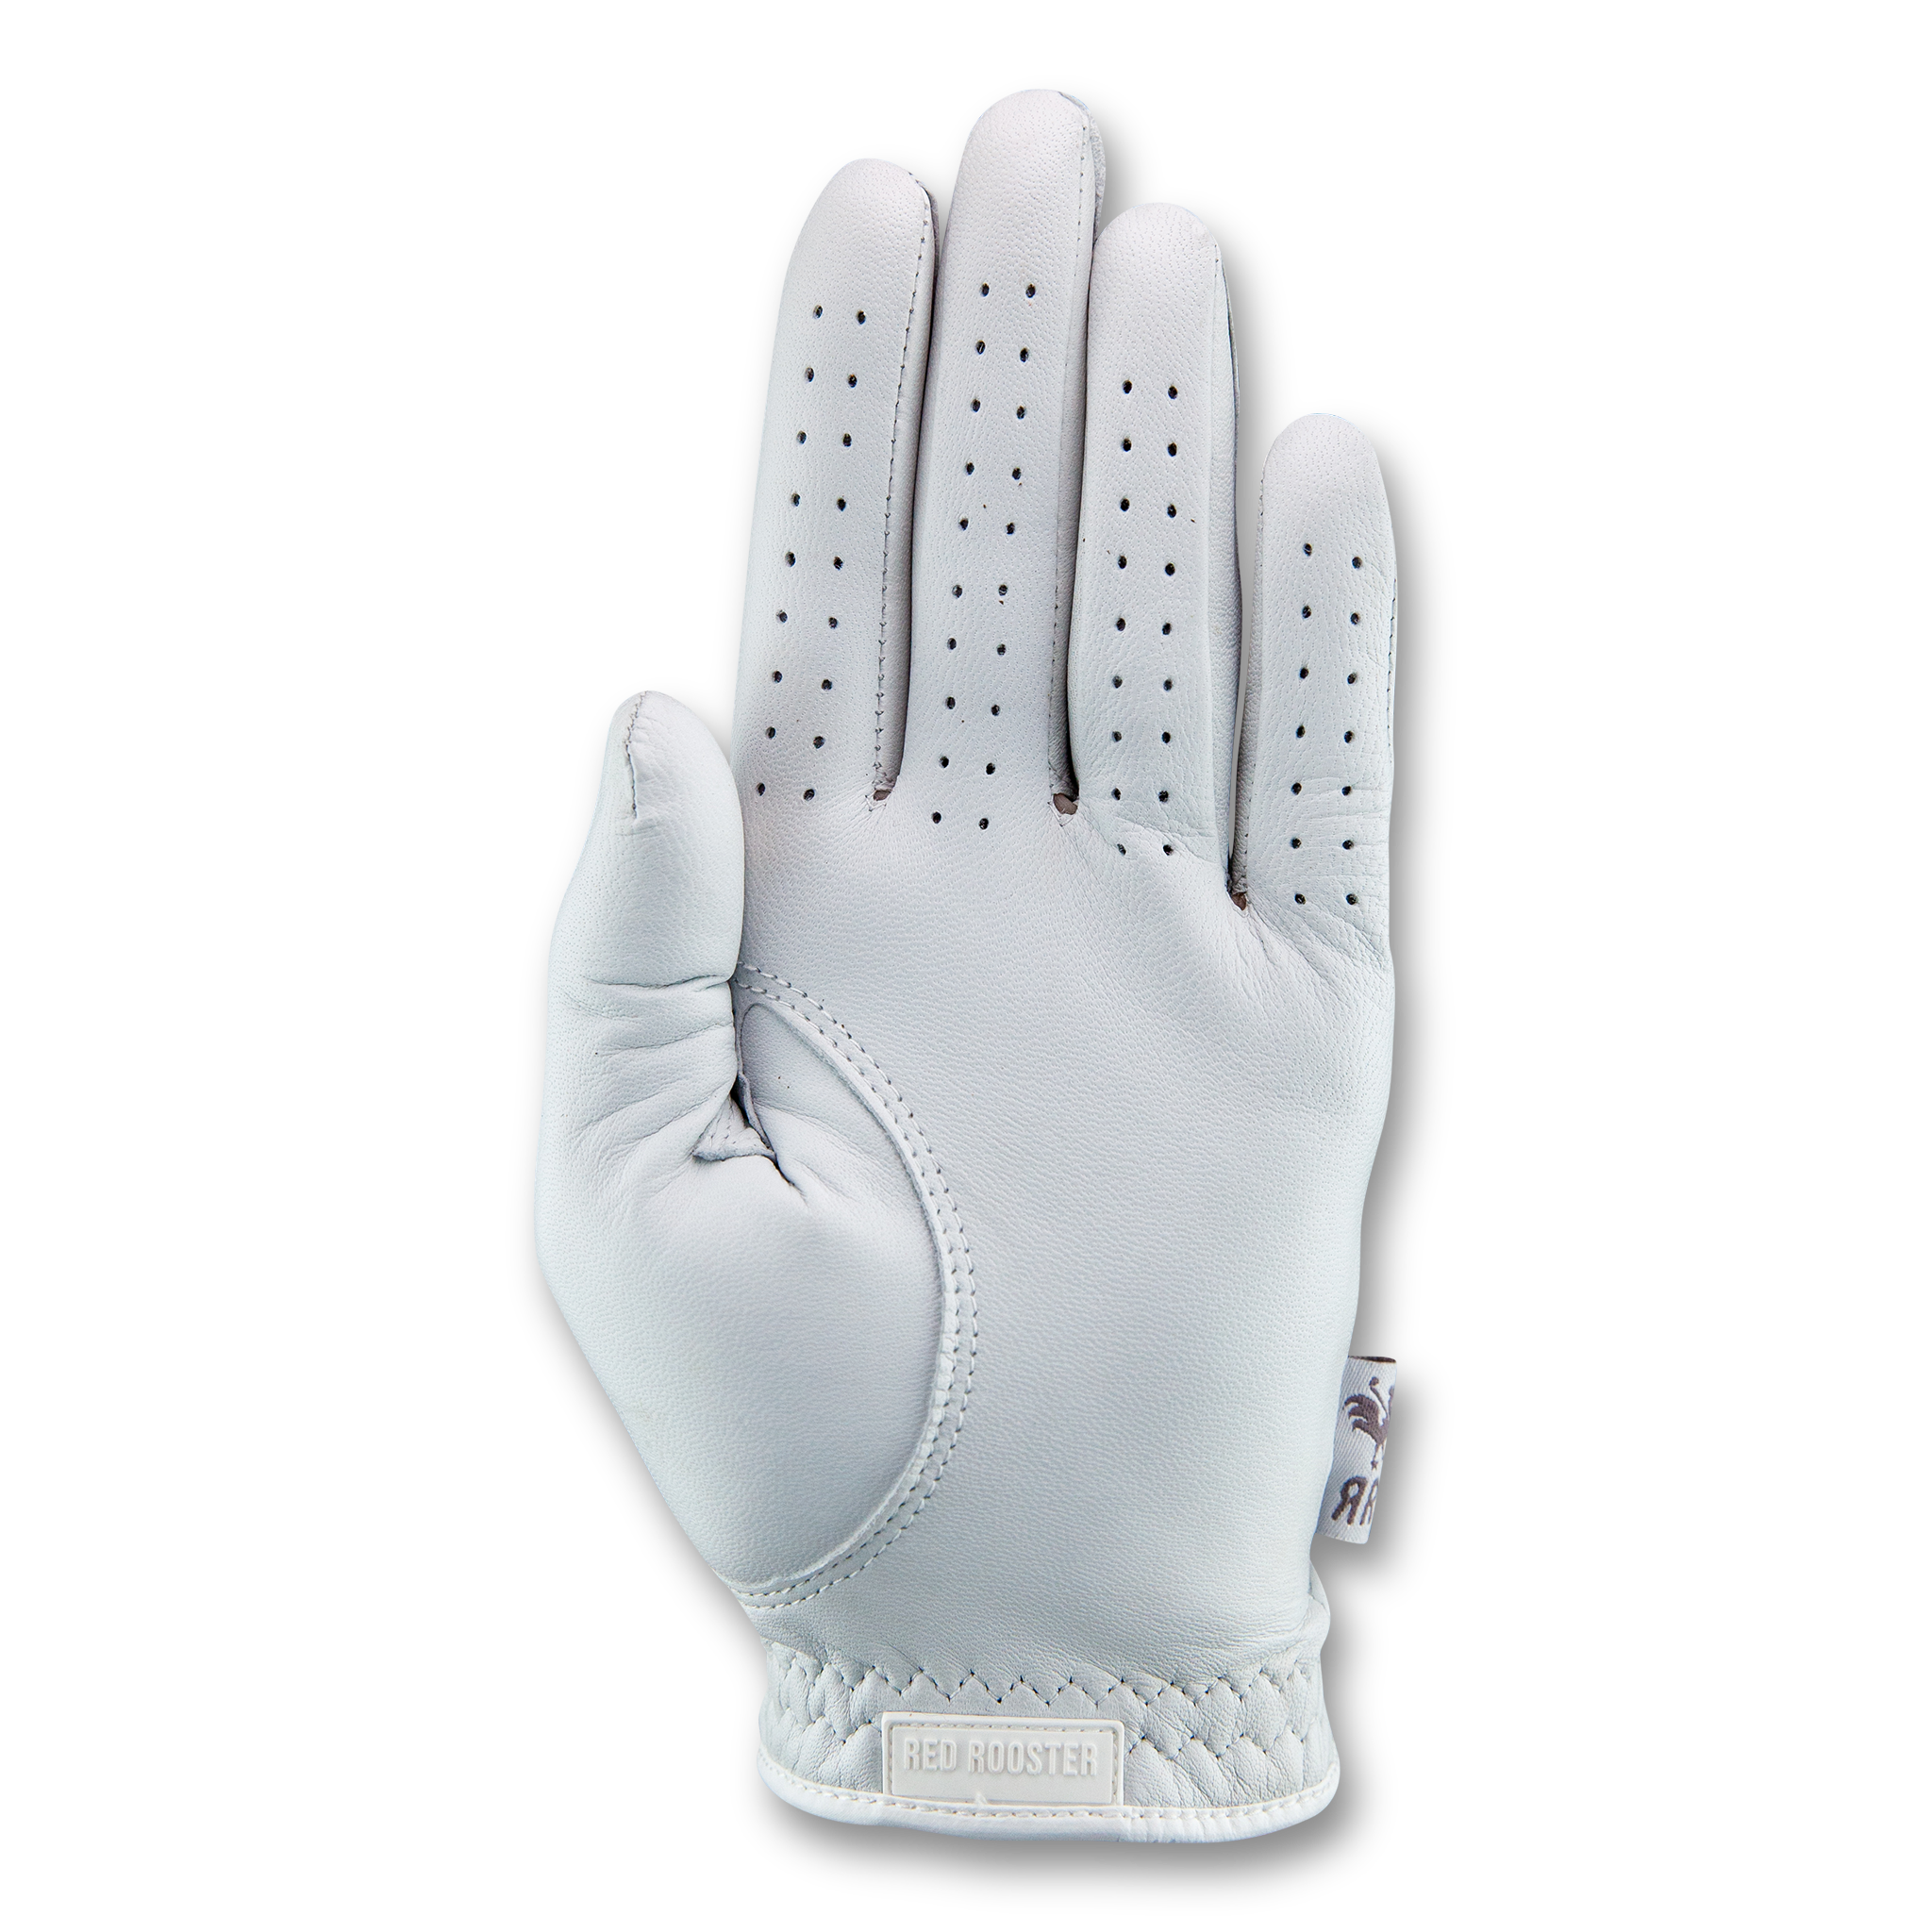 The Whiteout golf glove inner view